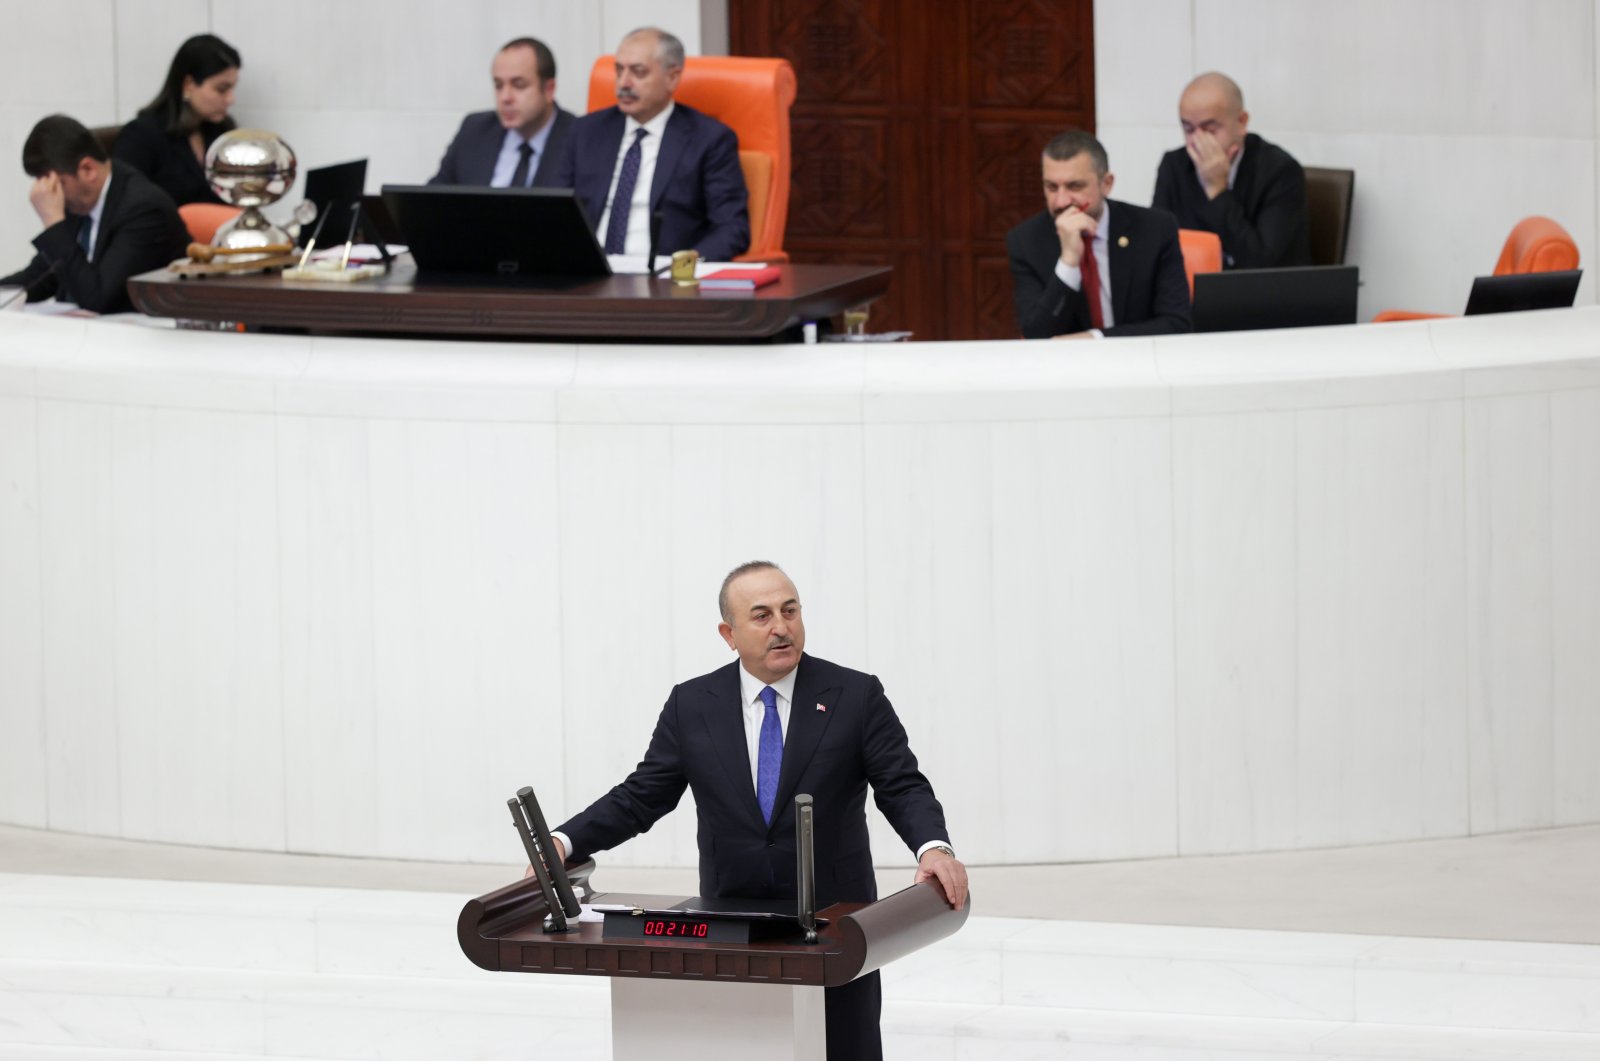 Foreign Minister Mevlüt Çavuşoğlu speaks during the budget discussions at the Parliament in the capital Ankara, Türkiye, Dec. 12, 2022. (AA Photo)